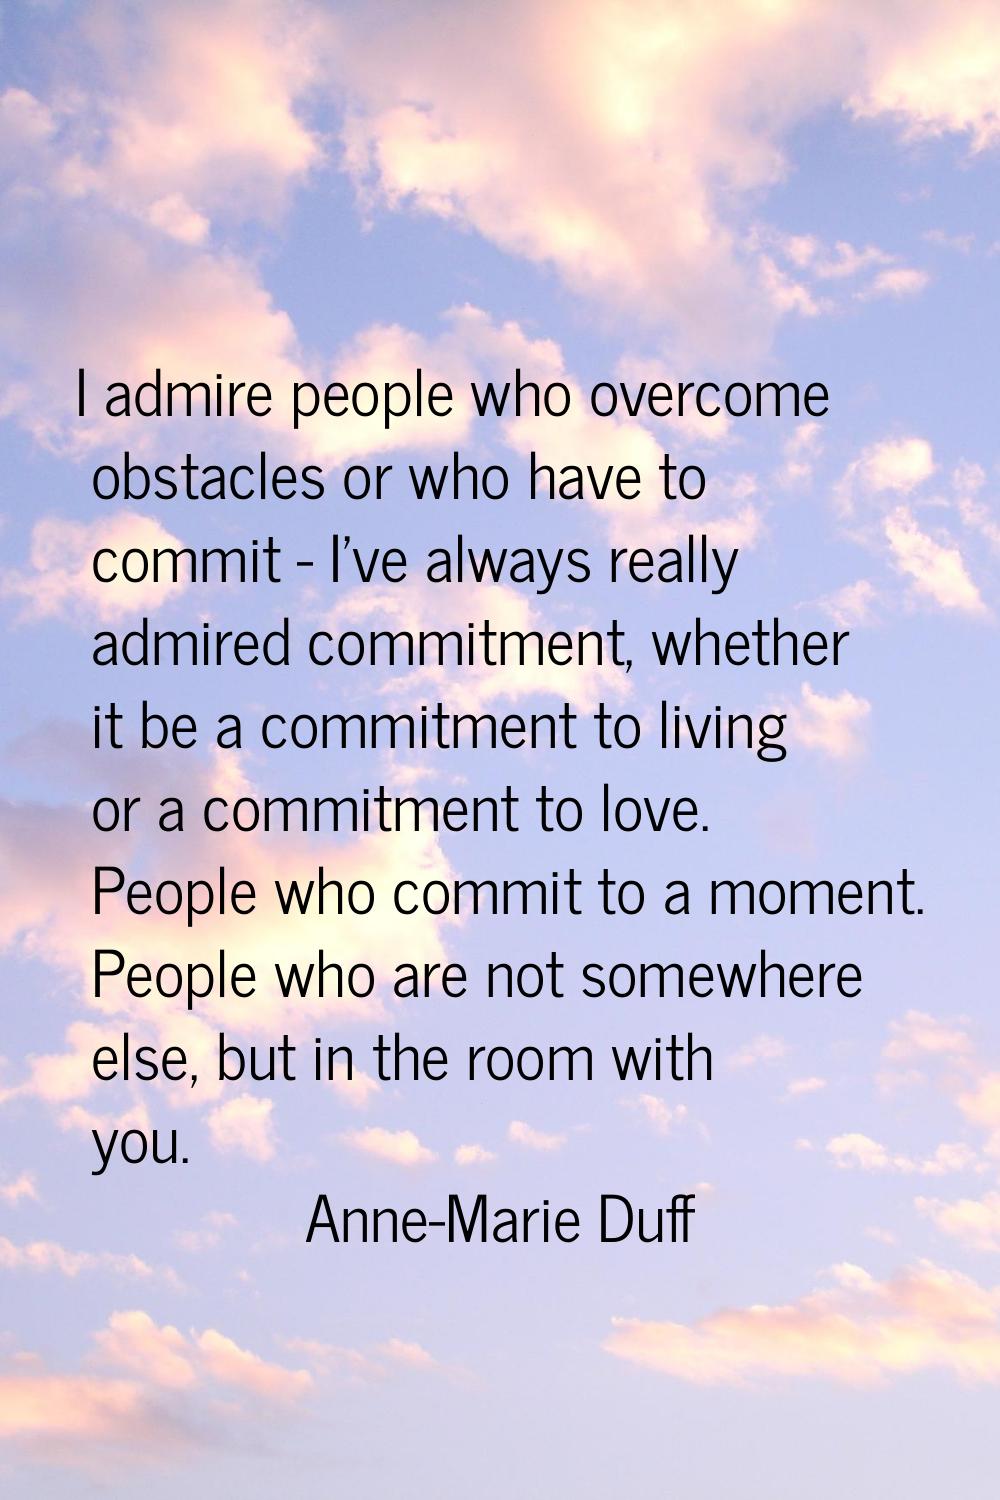 I admire people who overcome obstacles or who have to commit - I've always really admired commitmen